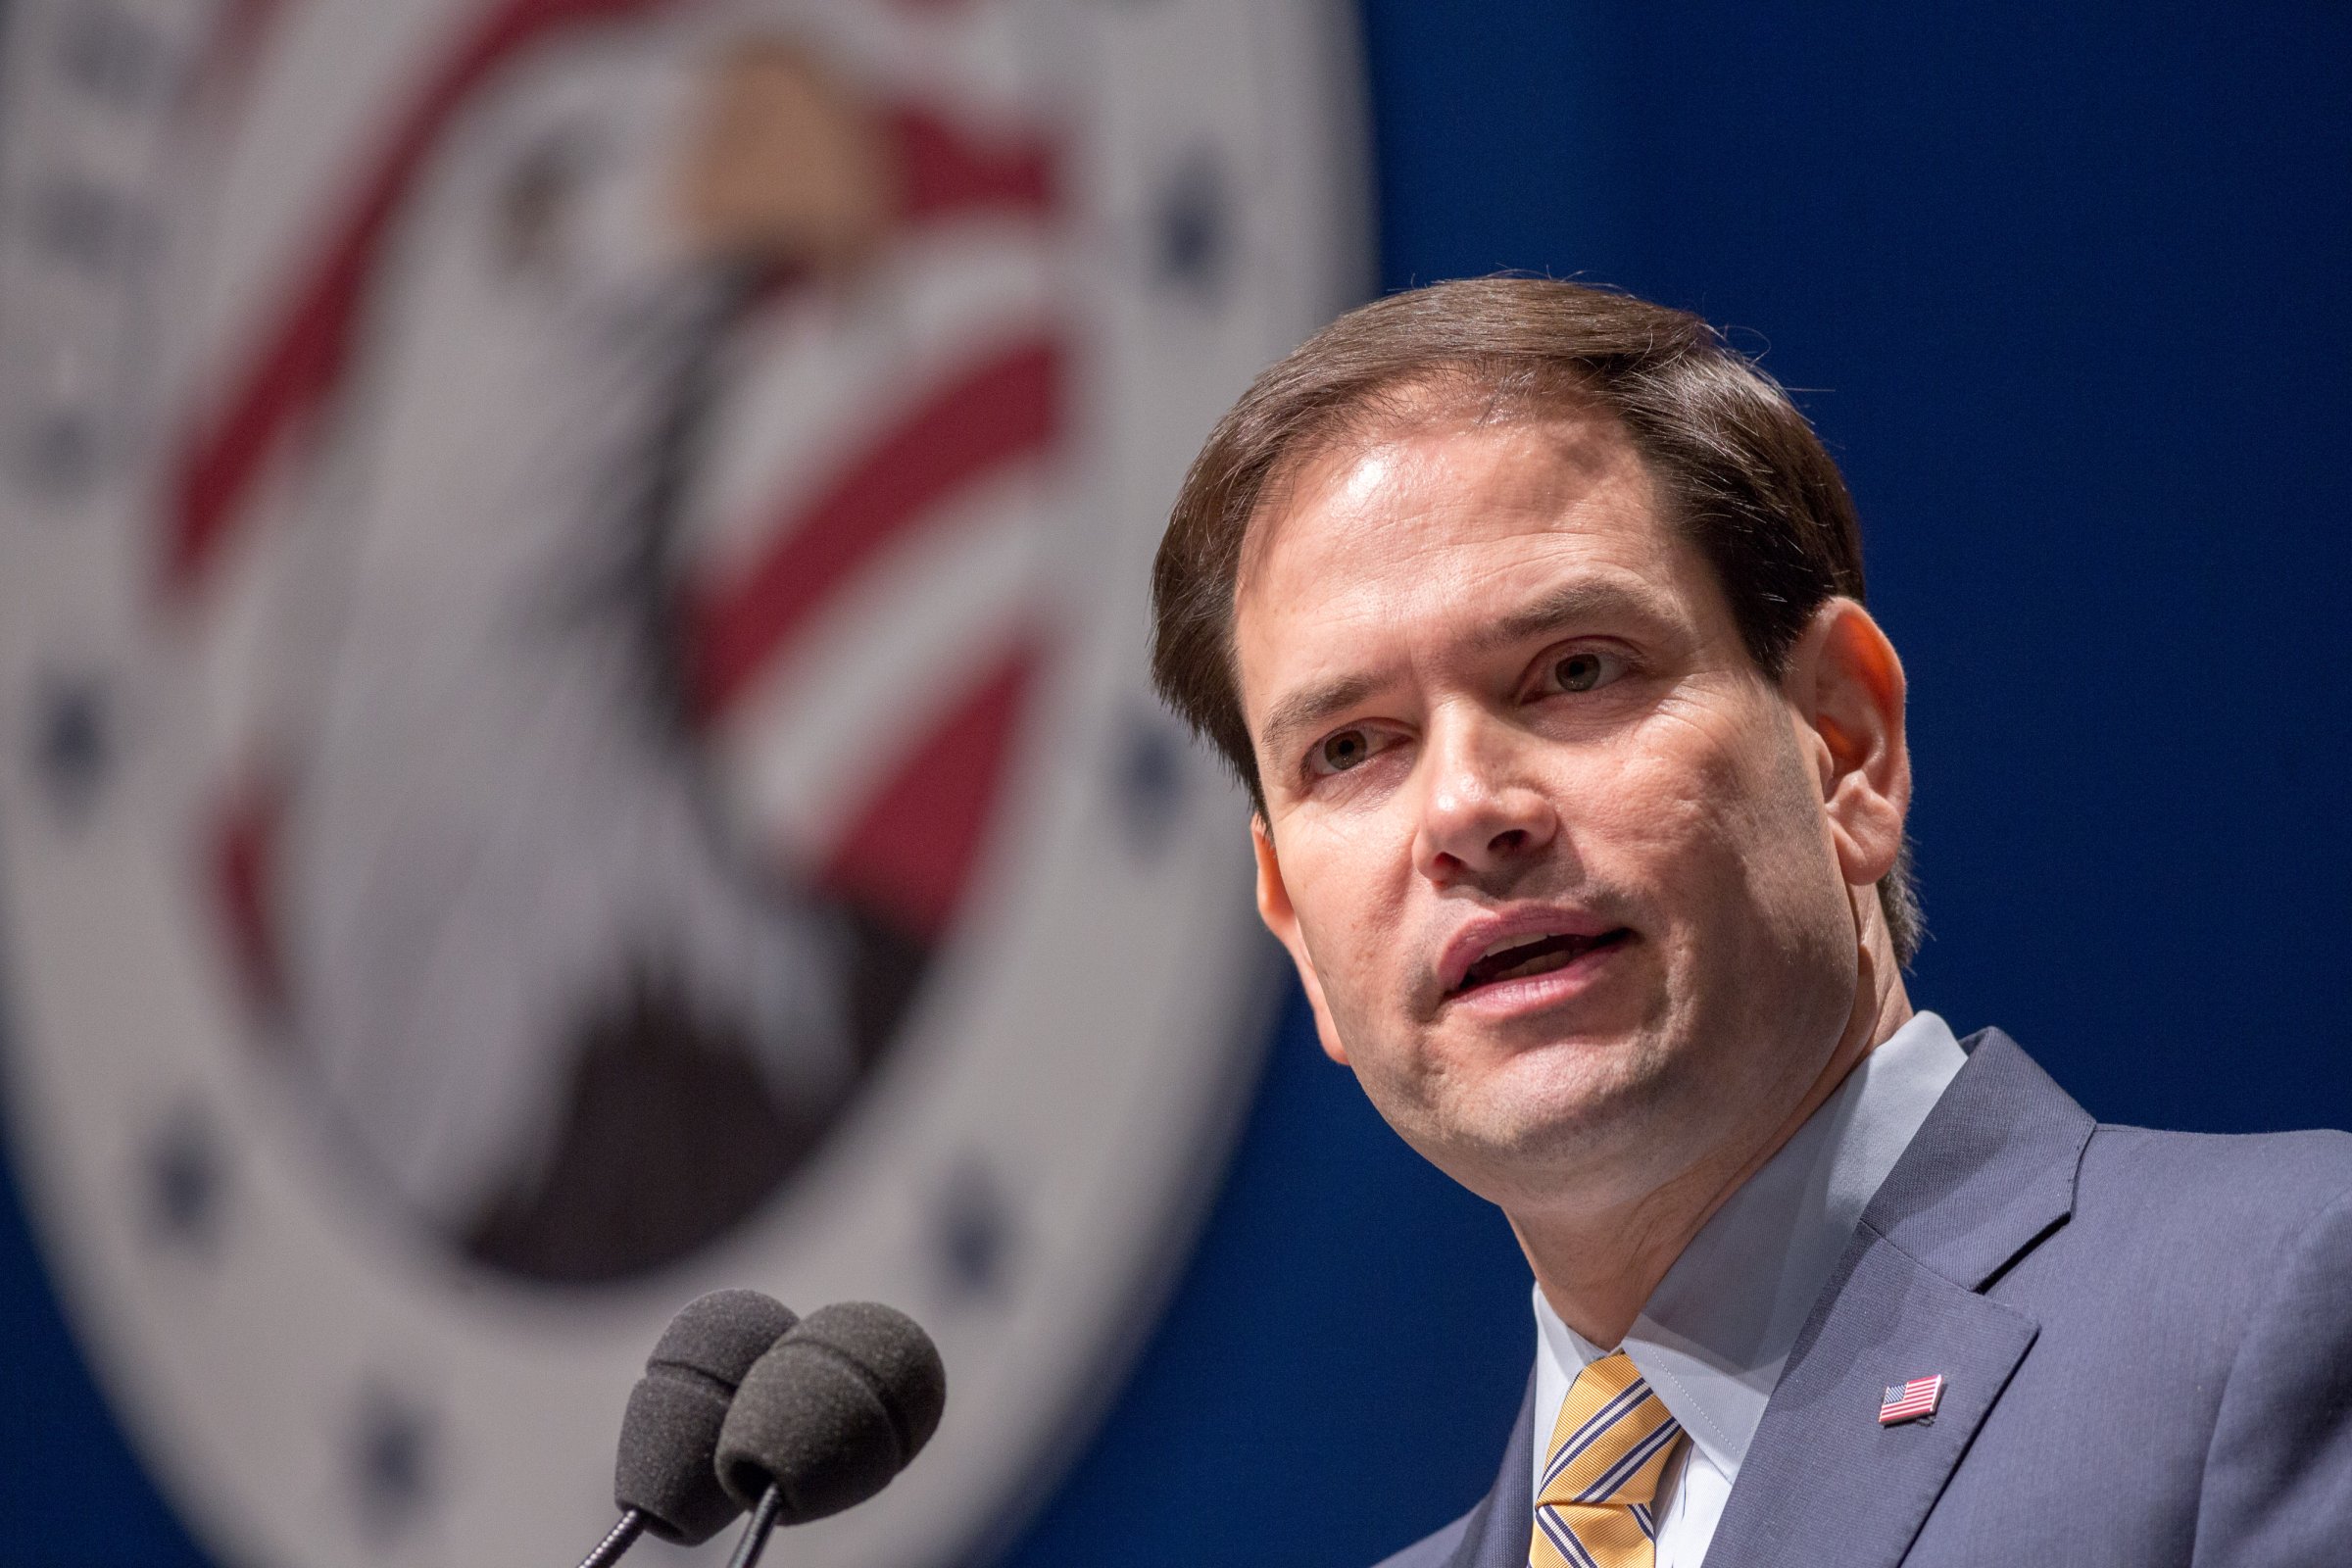 Republican Presidential candidate U.S. Sen. Marco Rubio speaks during the Freedom Summit on May 9, 2015 in Greenville, South Carolina.